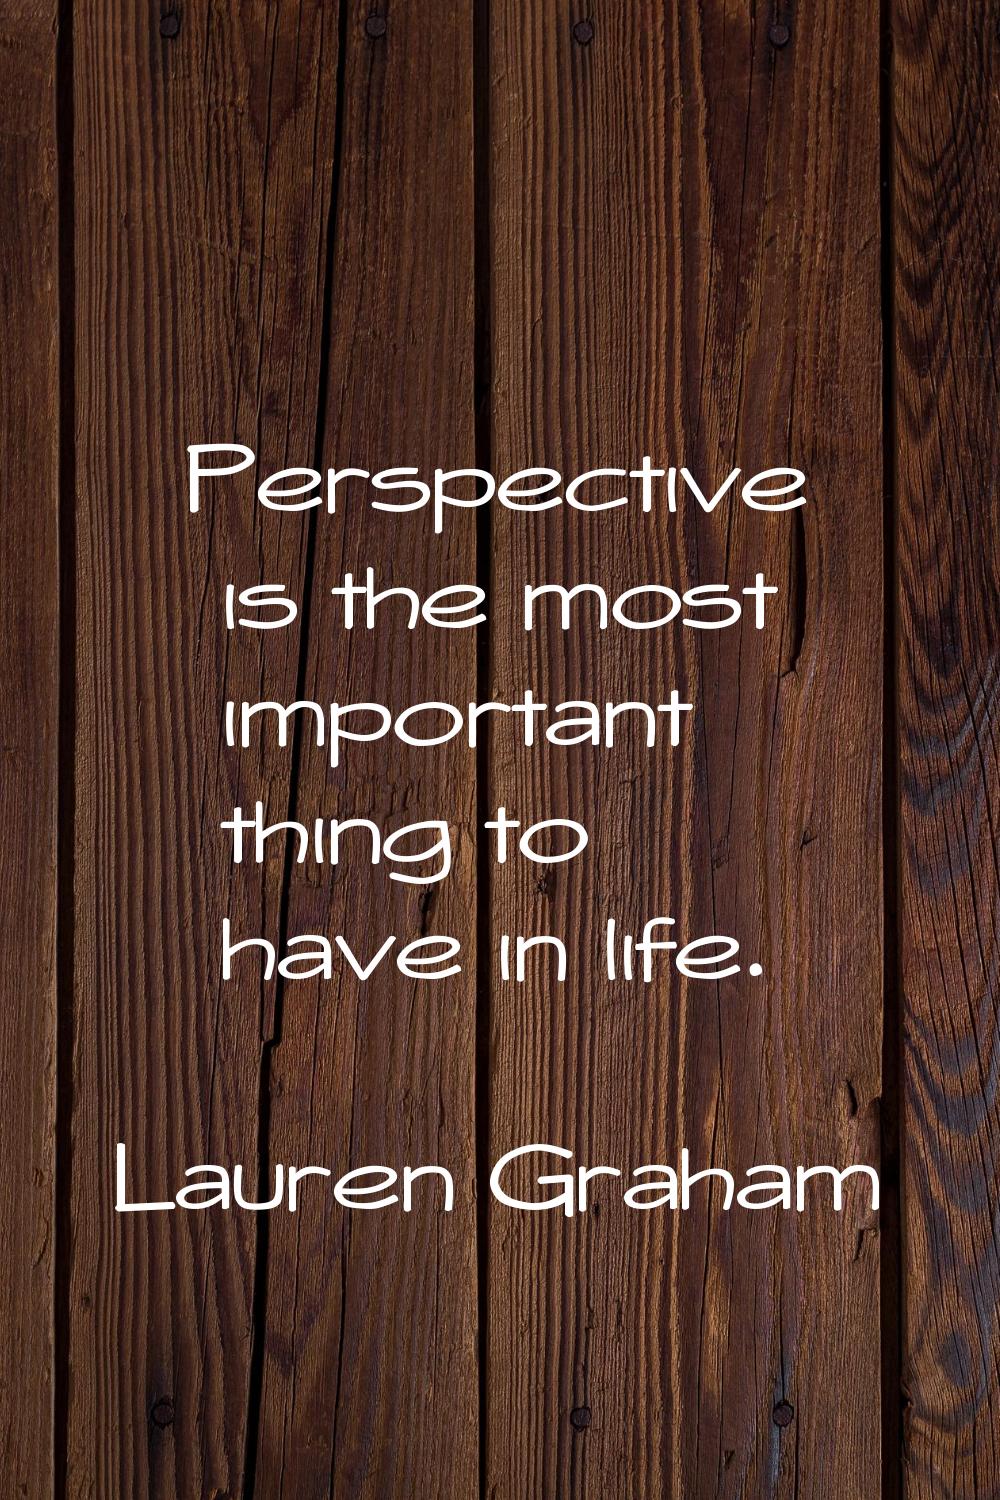 Perspective is the most important thing to have in life.